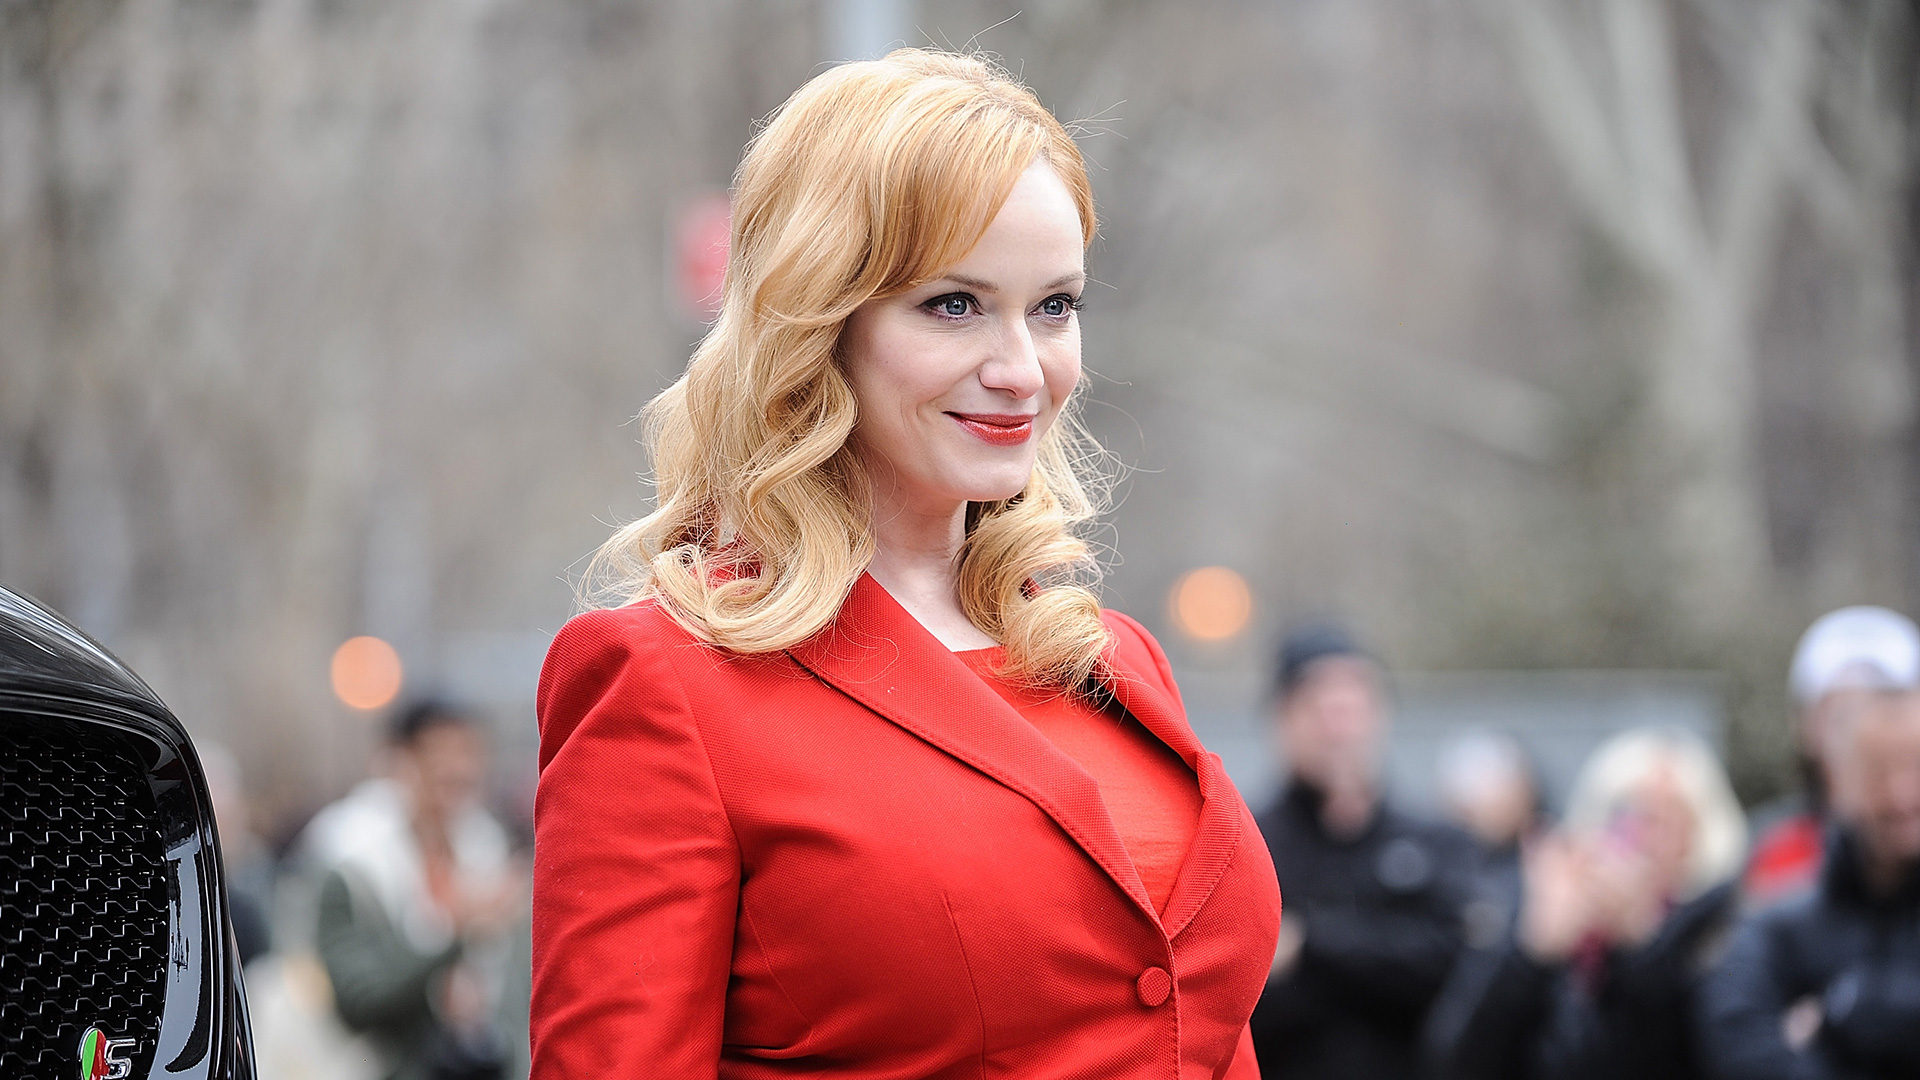 May 3, 1975: Actress Christina Hendricks, Known for Challenging Hollywood and Fashion to See Beyond Size Zero, Was Born